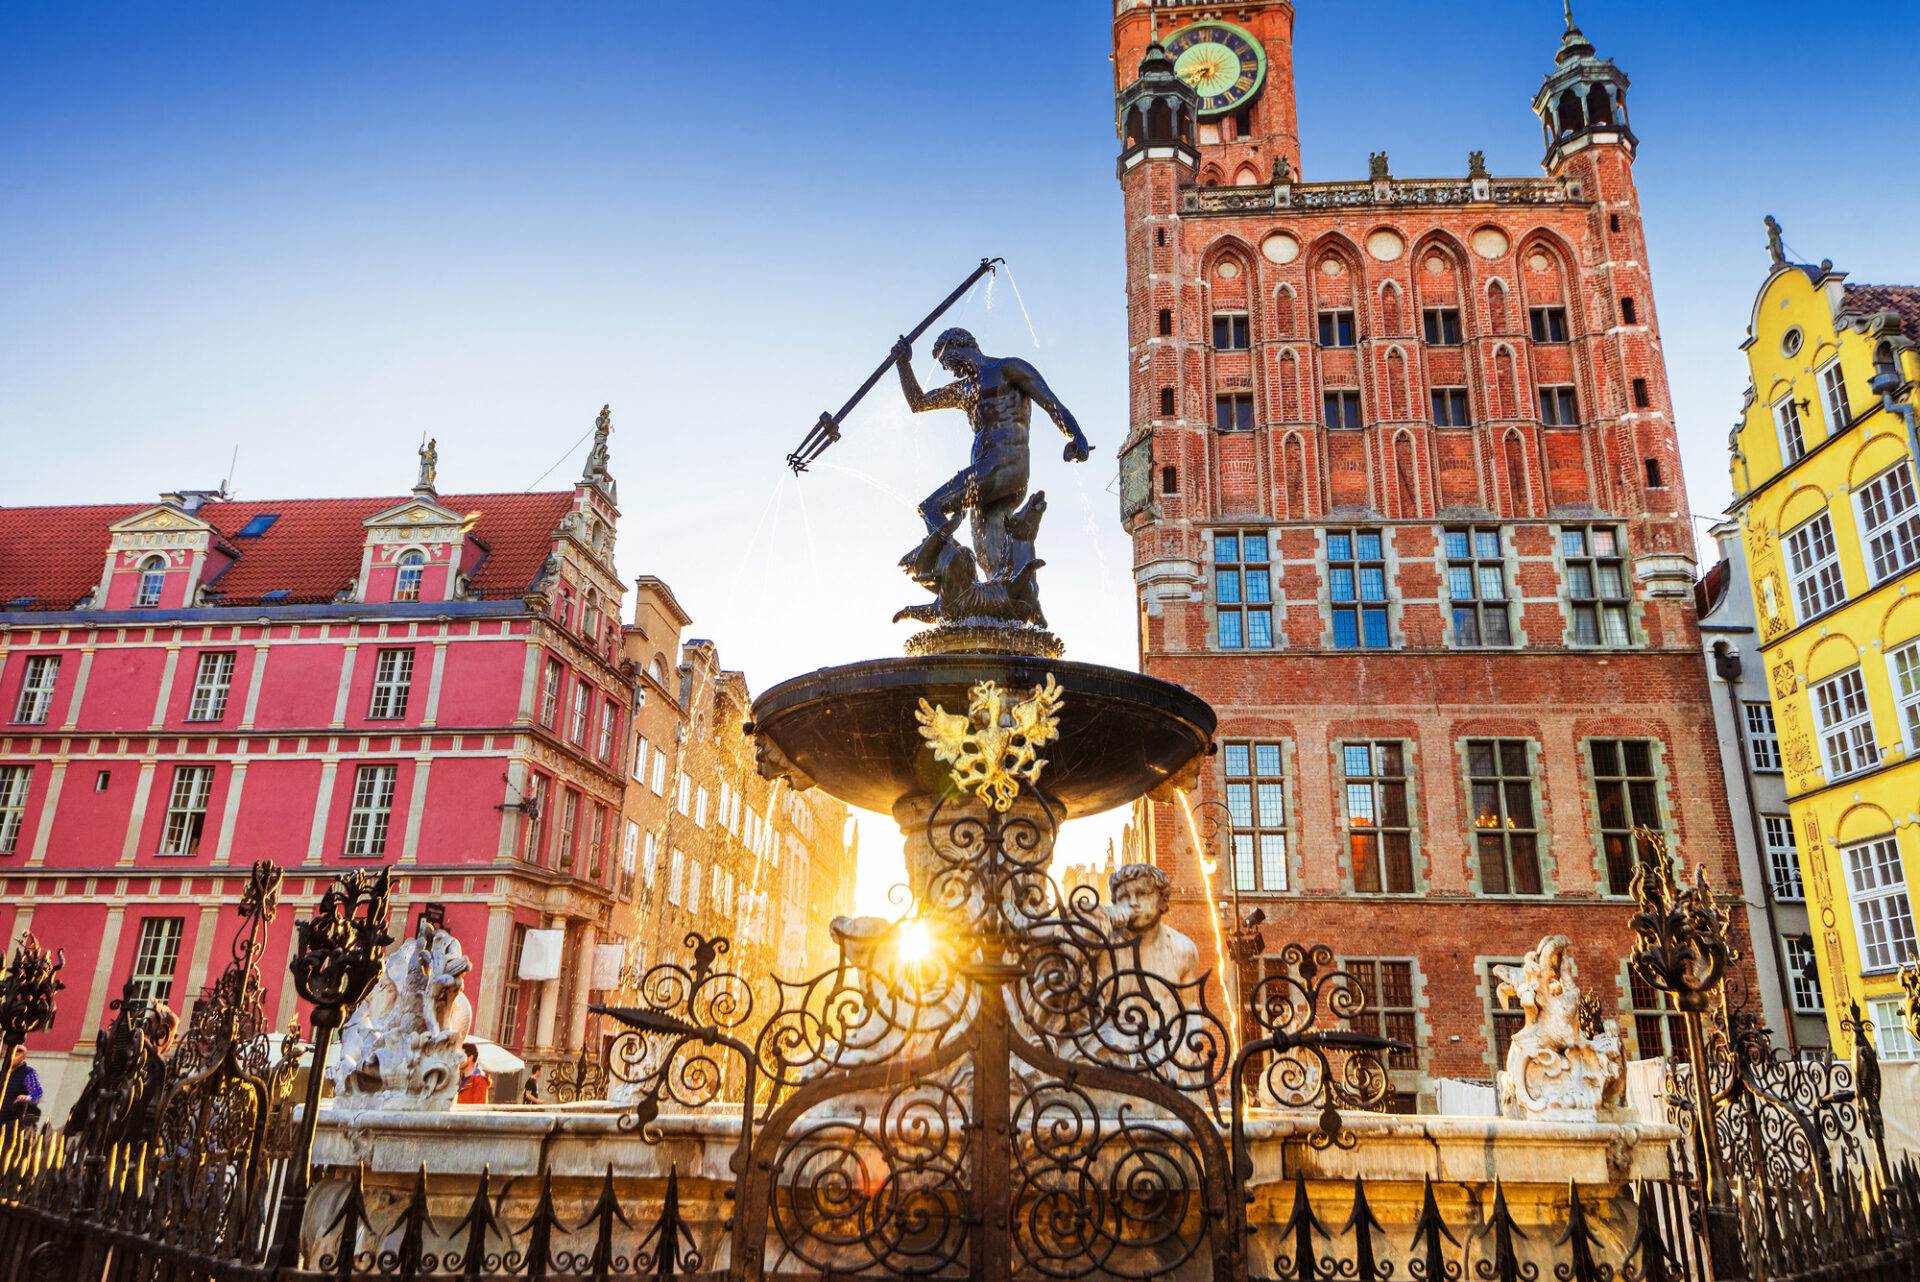 Beautiful Fountain In The Old Center Of Gdansk City, Poland